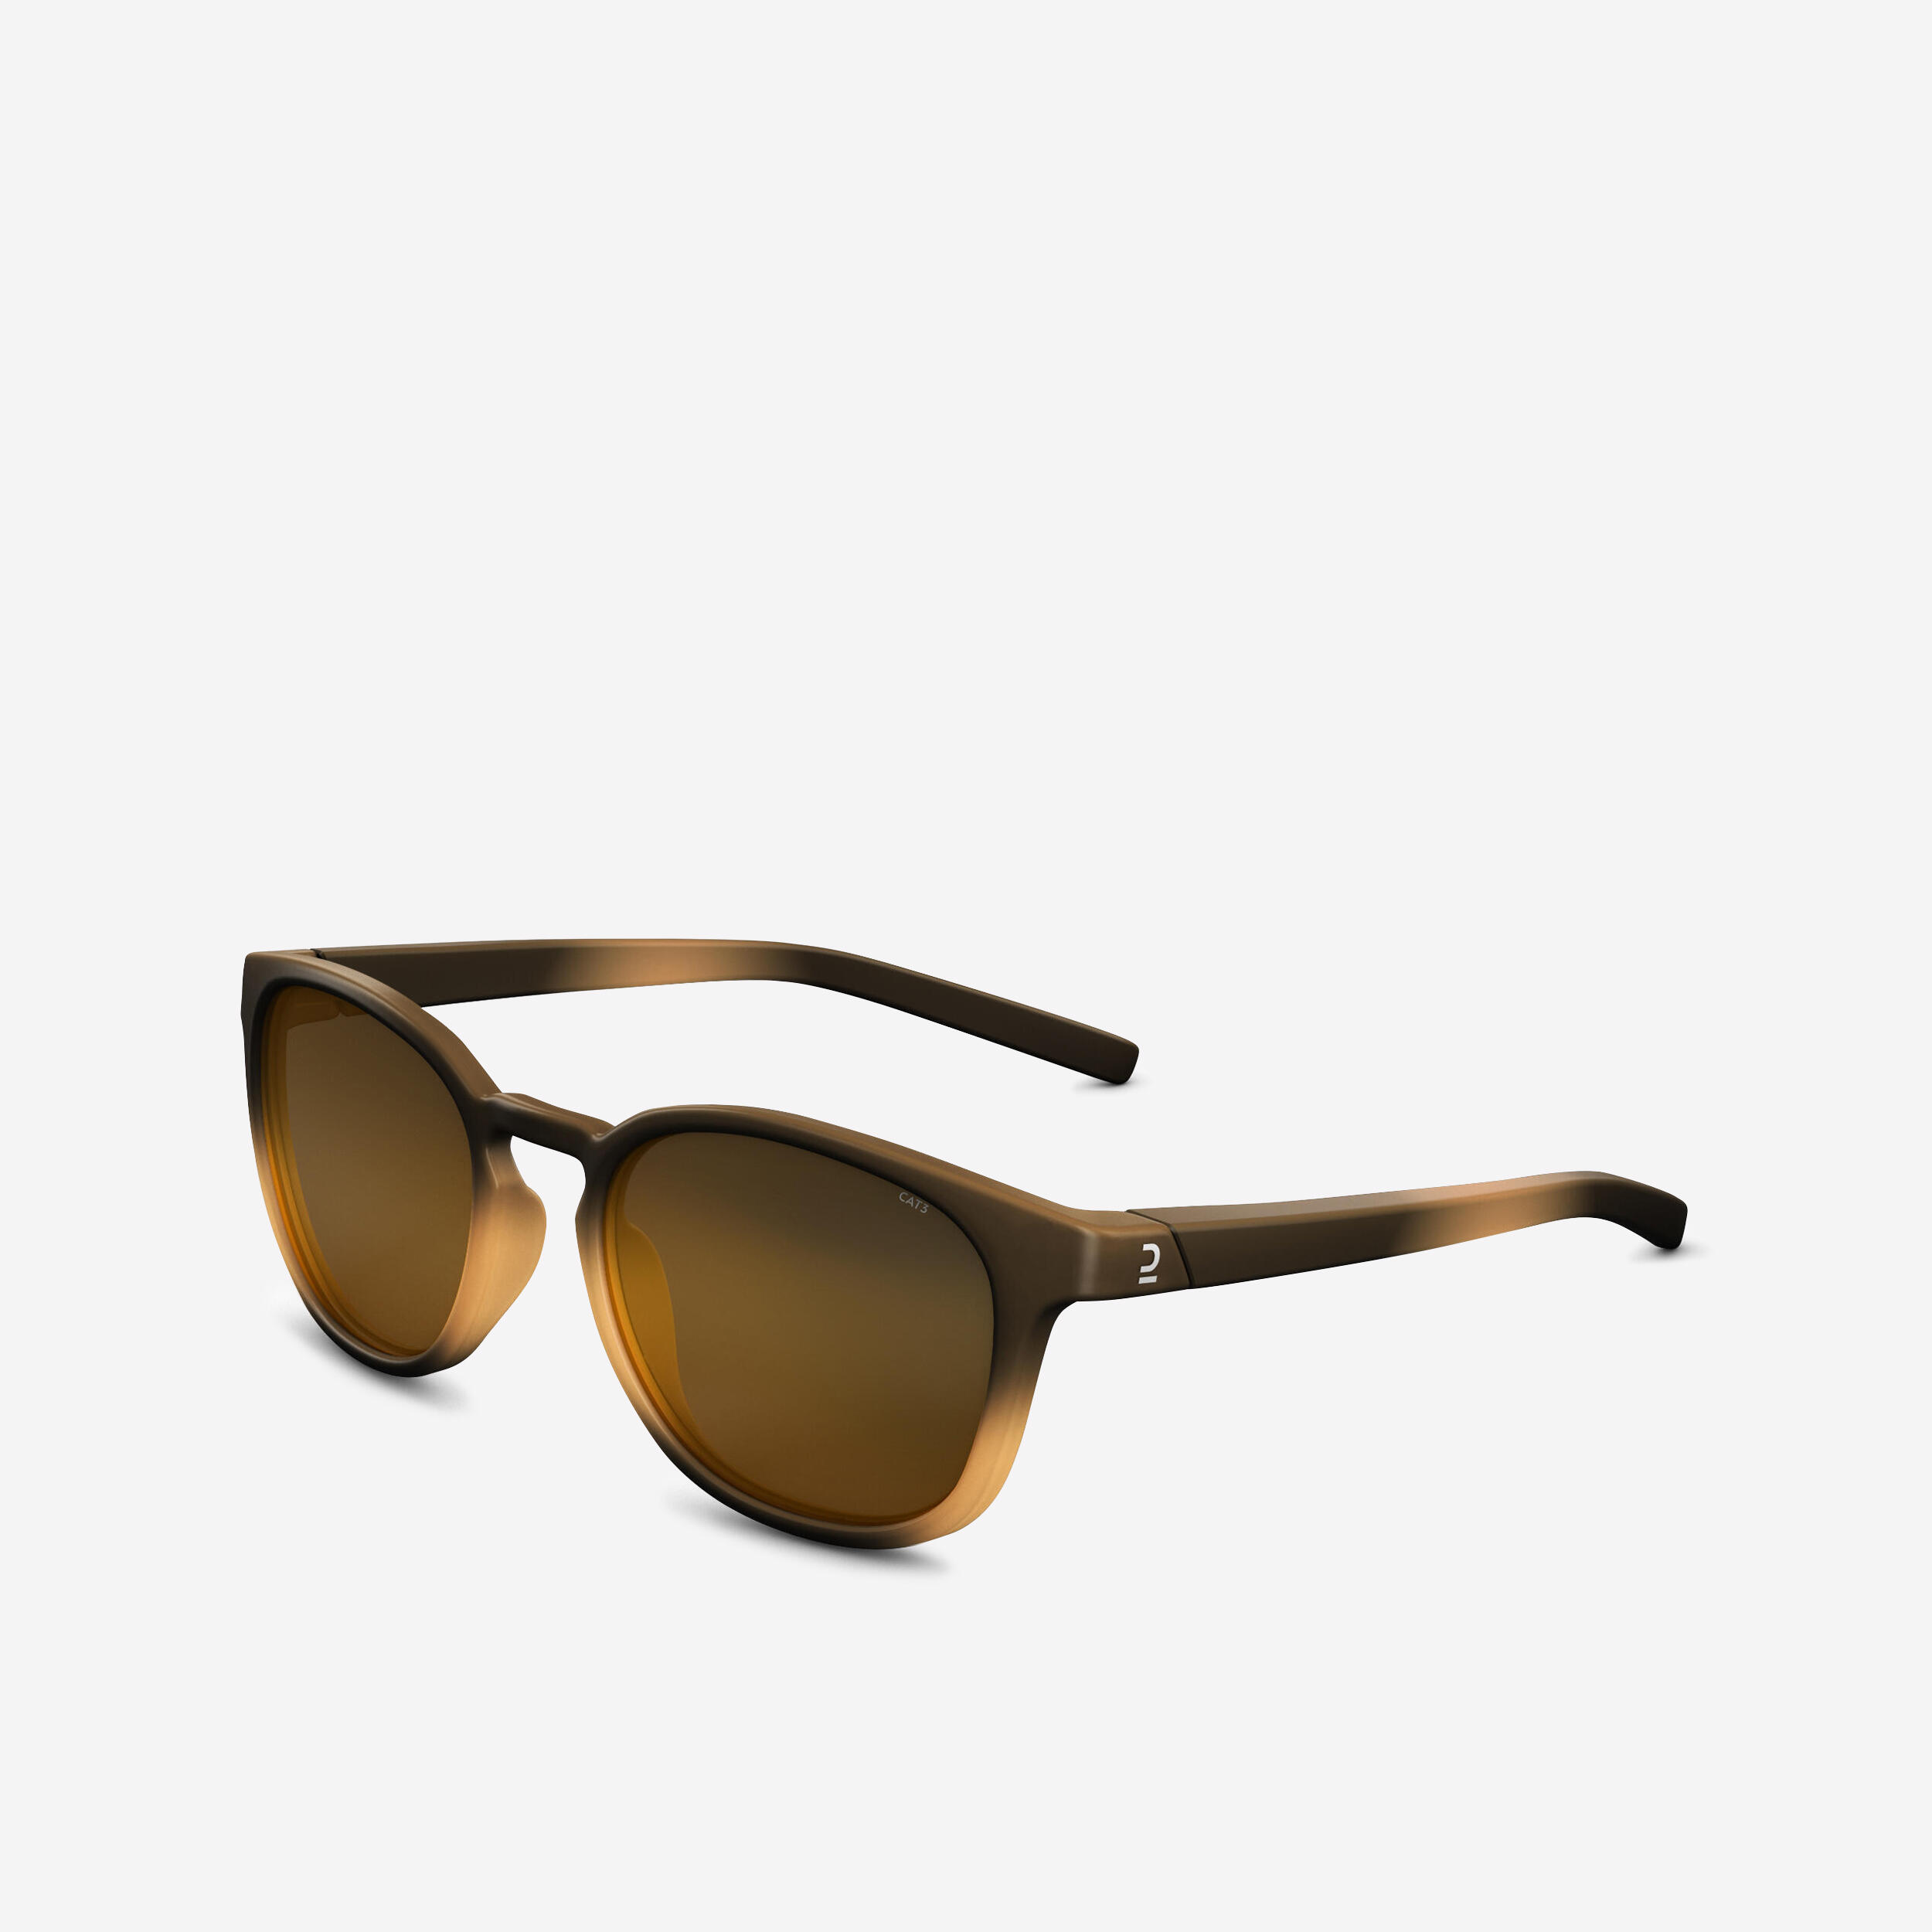 Image of MH160 hiking sunglasses - Adults